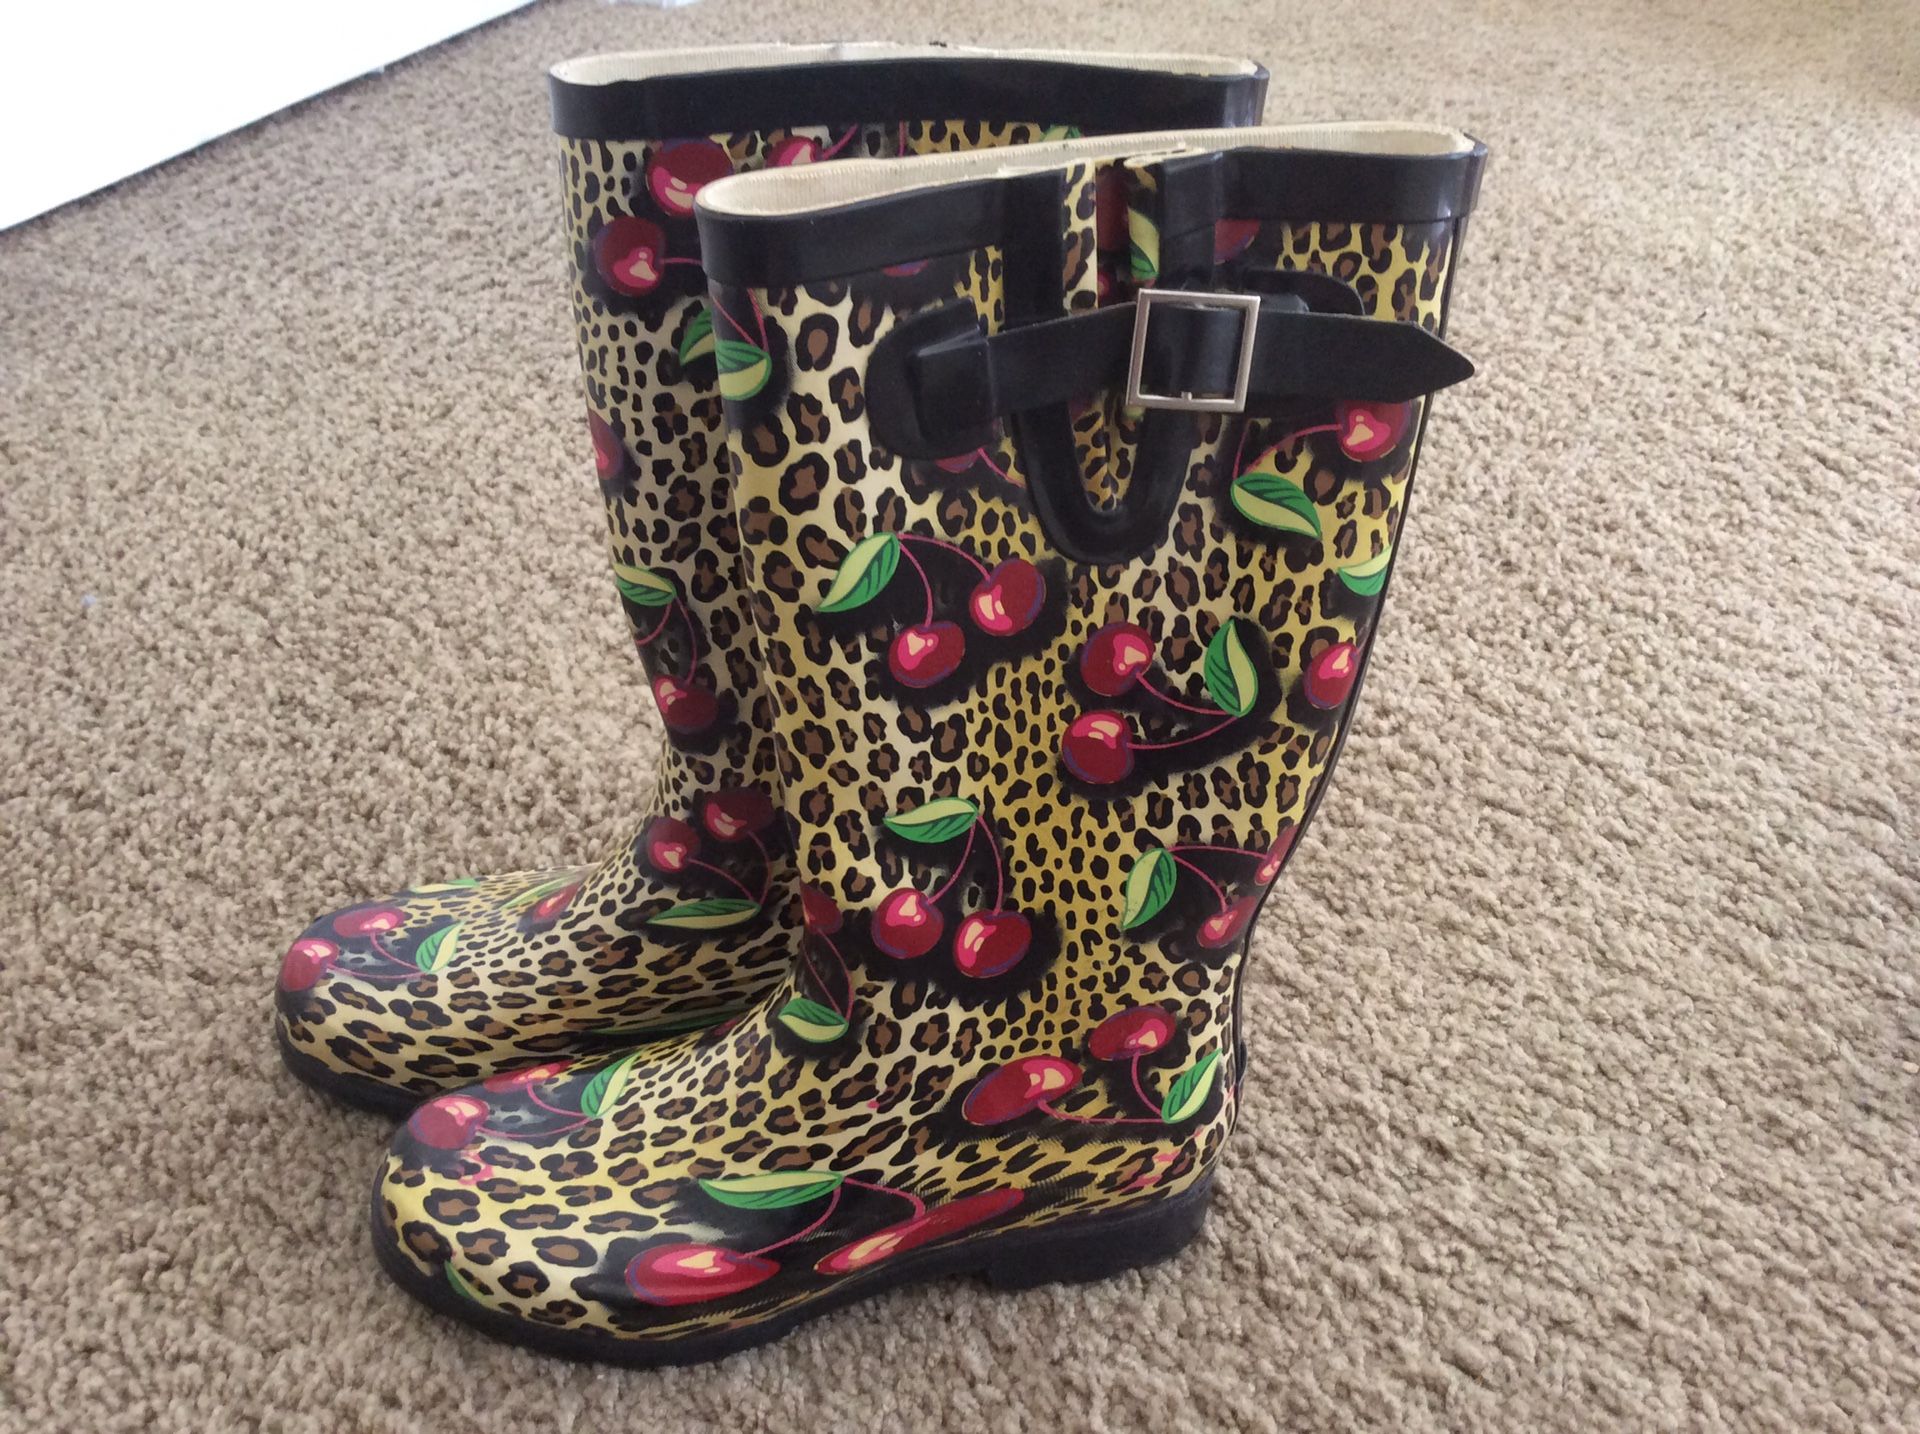 Leopard and Cherry Rain Boots (7)